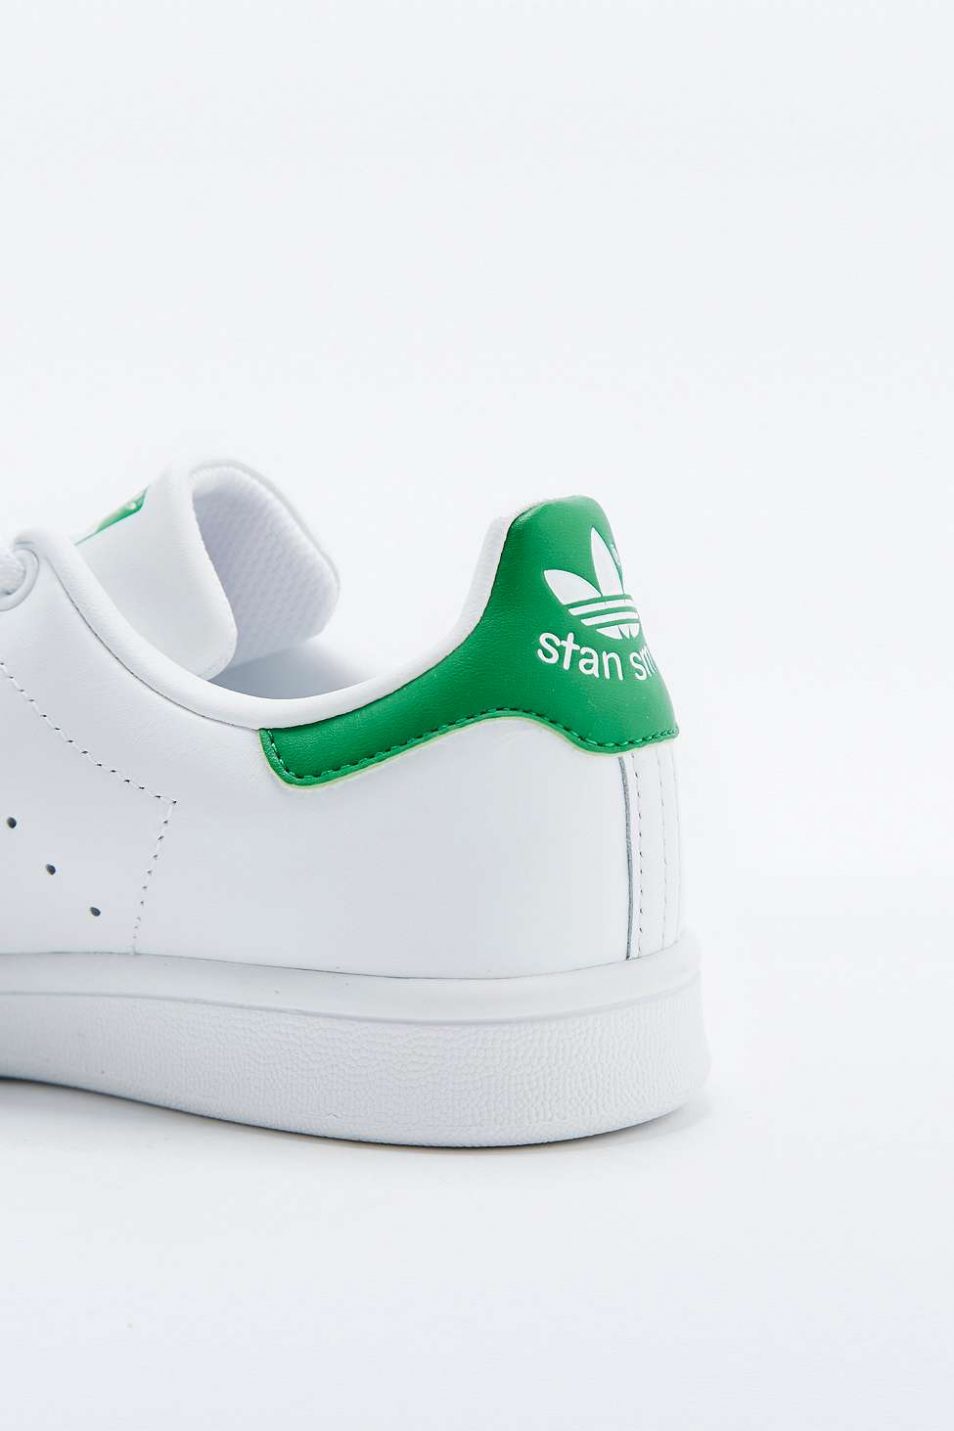 adidas Originals Stan Smith White and Green Trainers 4